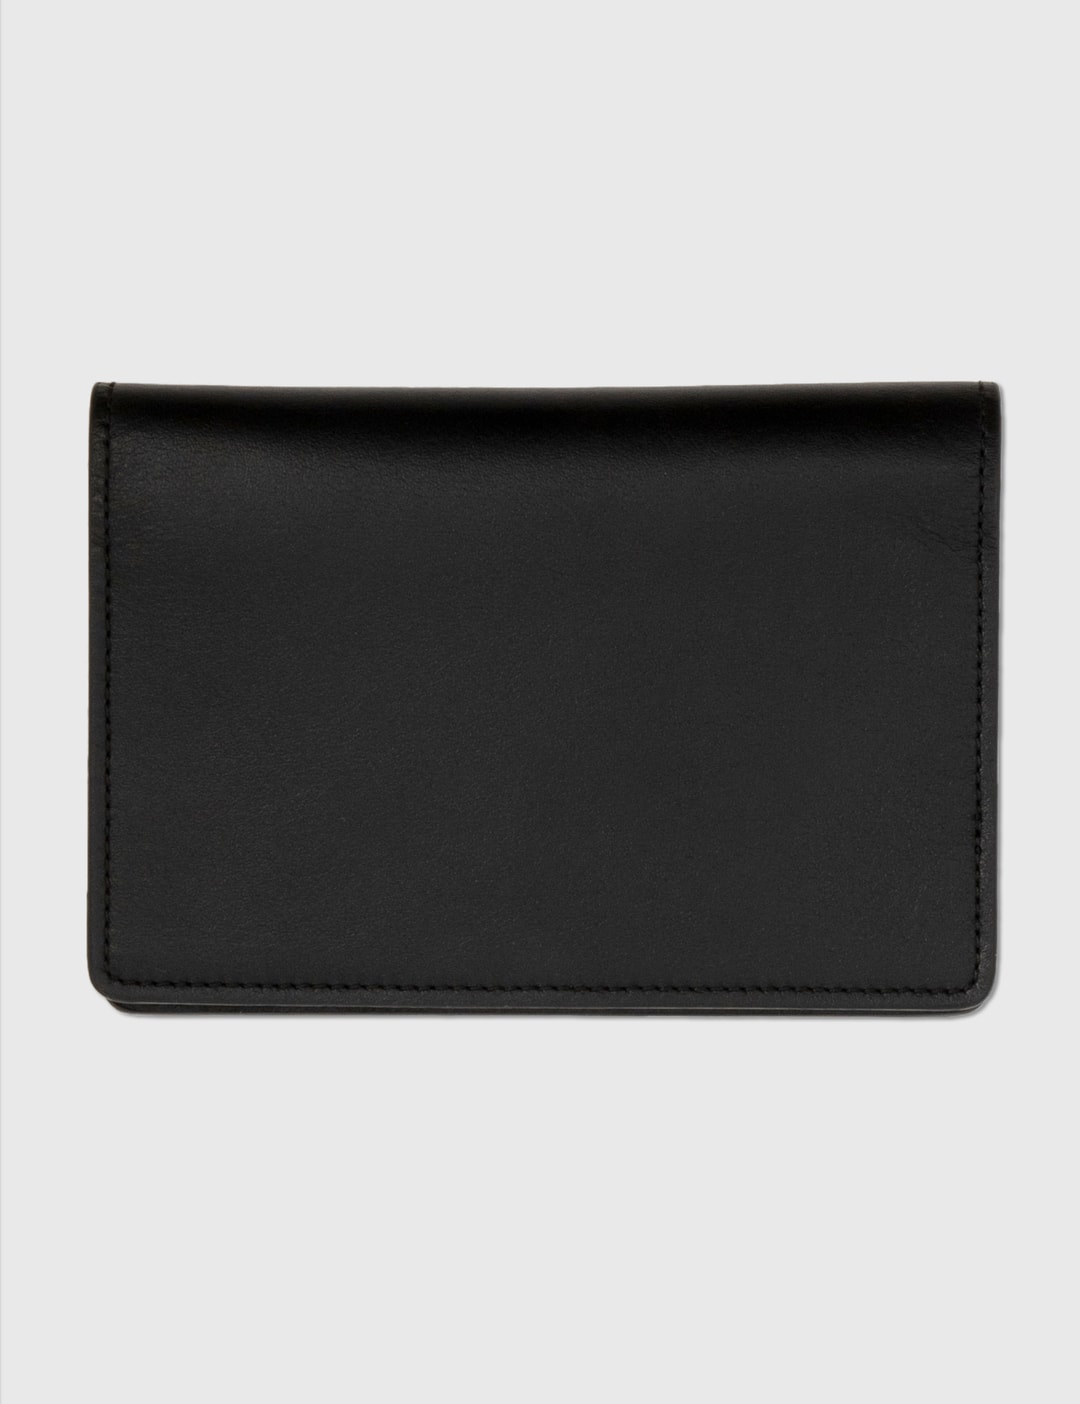 Fear of God - Passport Wallet | HBX - Globally Curated Fashion and ...